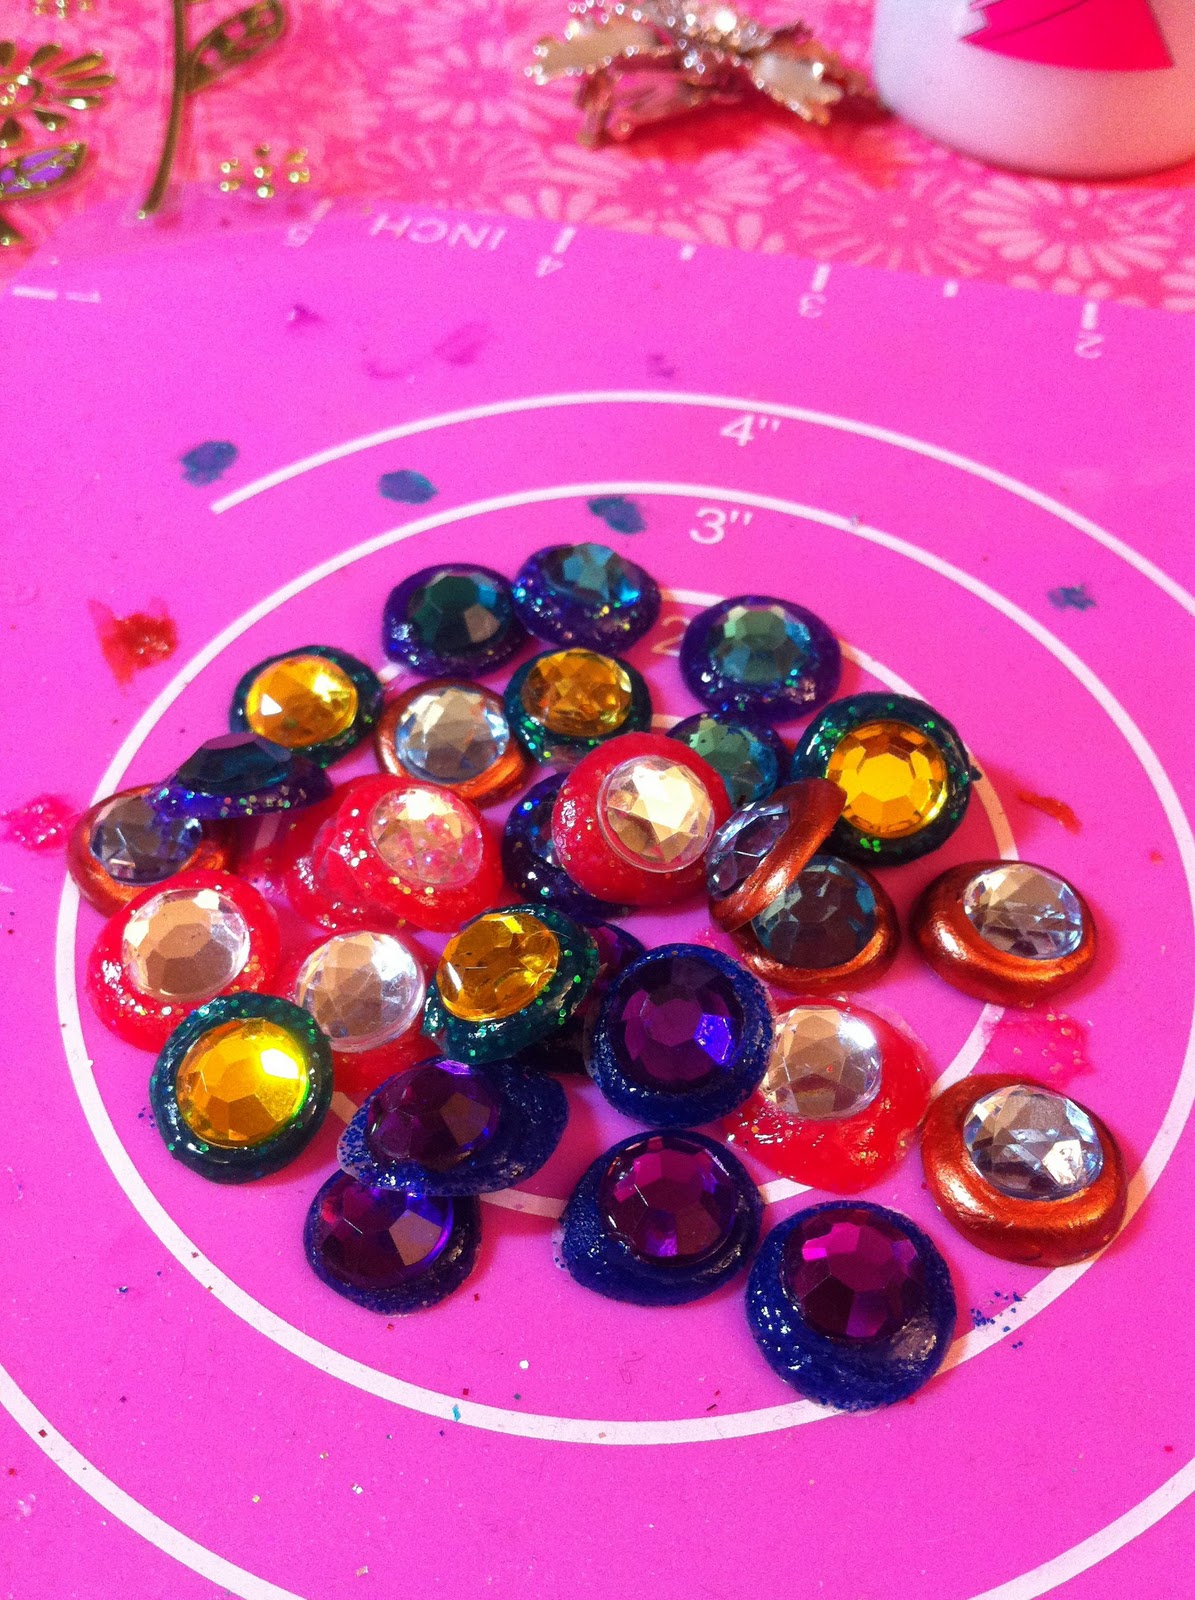 HOW TO: Squeeze Paint Gem Dots! - Crafty Chica